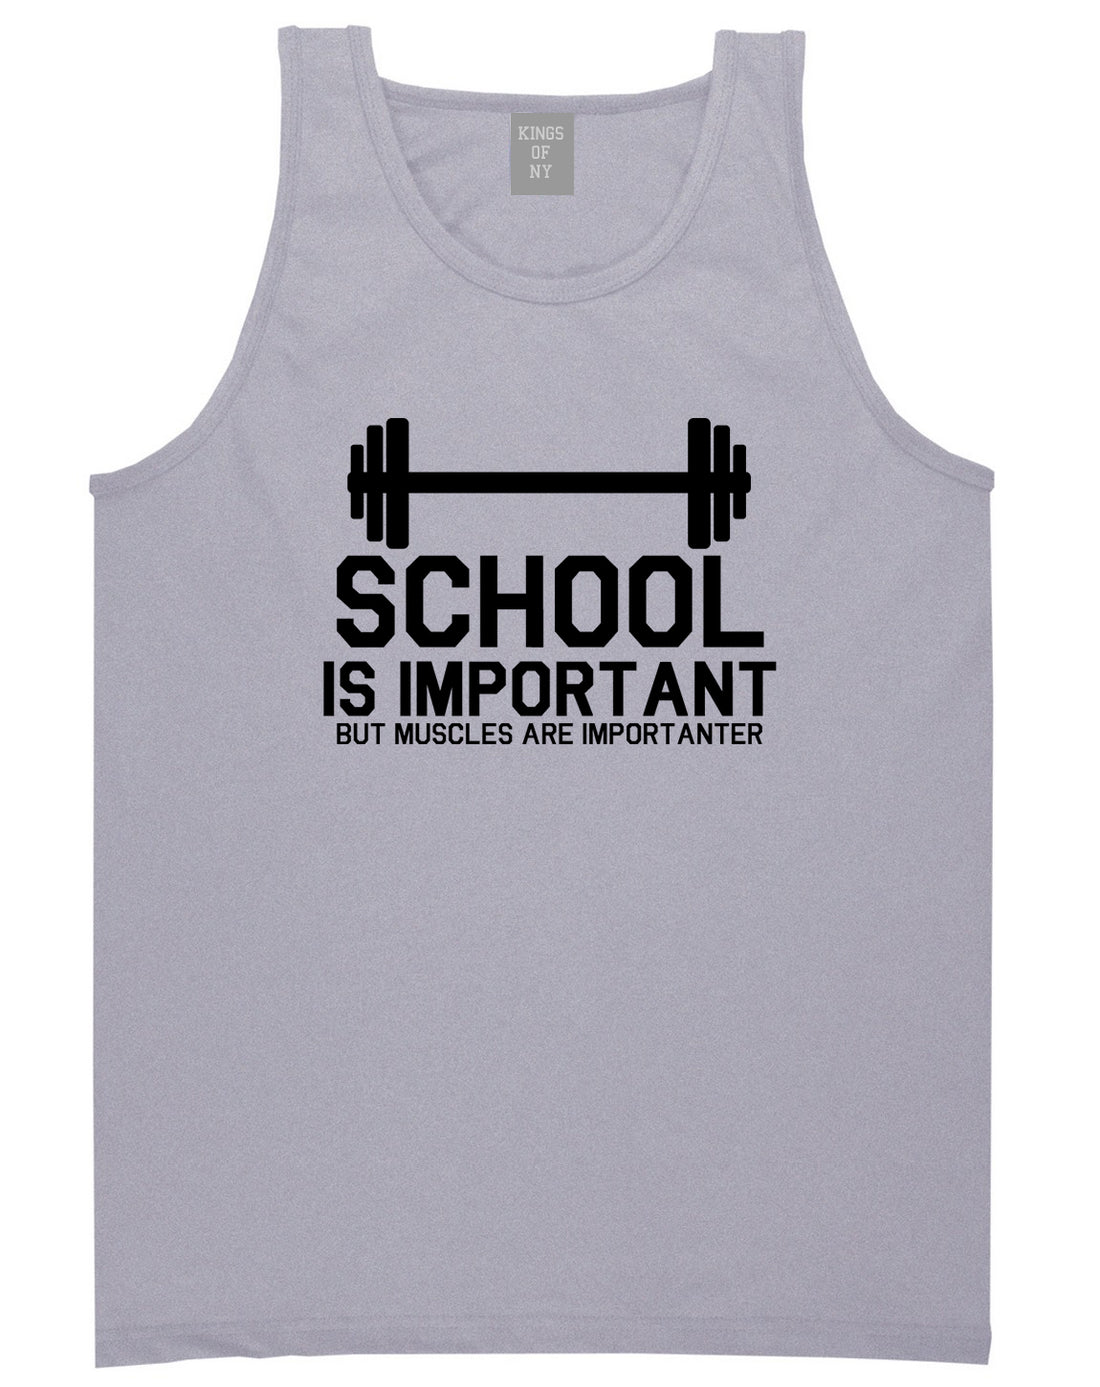 School Is Important But Muscles Are Importanter Funny Body Building Mens Tank Top T-Shirt Grey